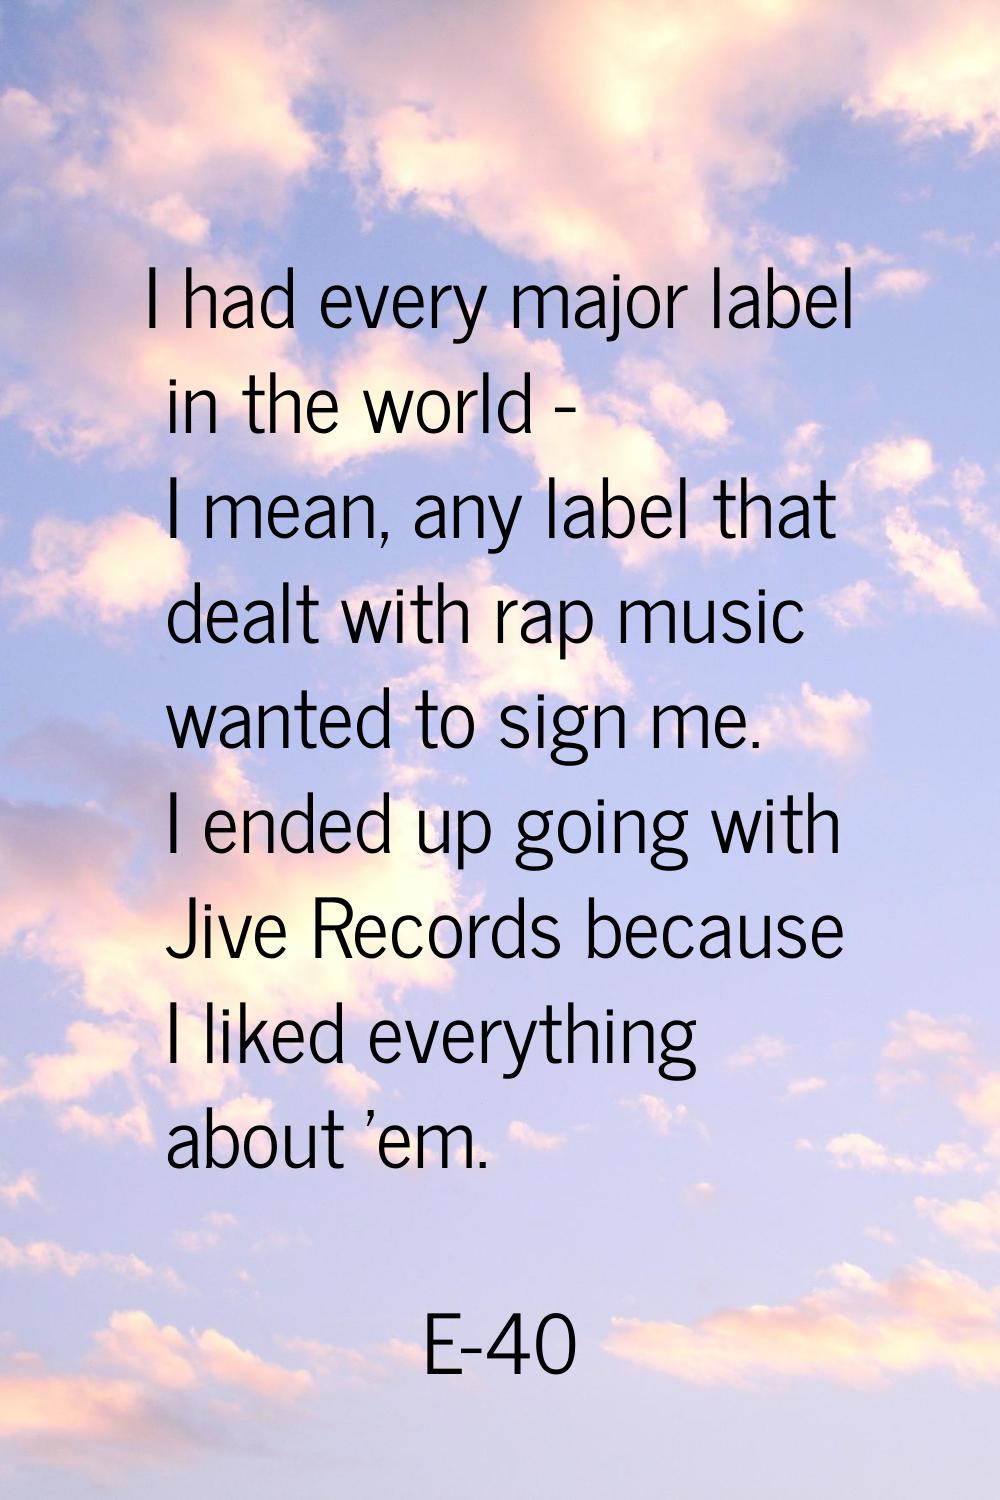 I had every major label in the world - I mean, any label that dealt with rap music wanted to sign m